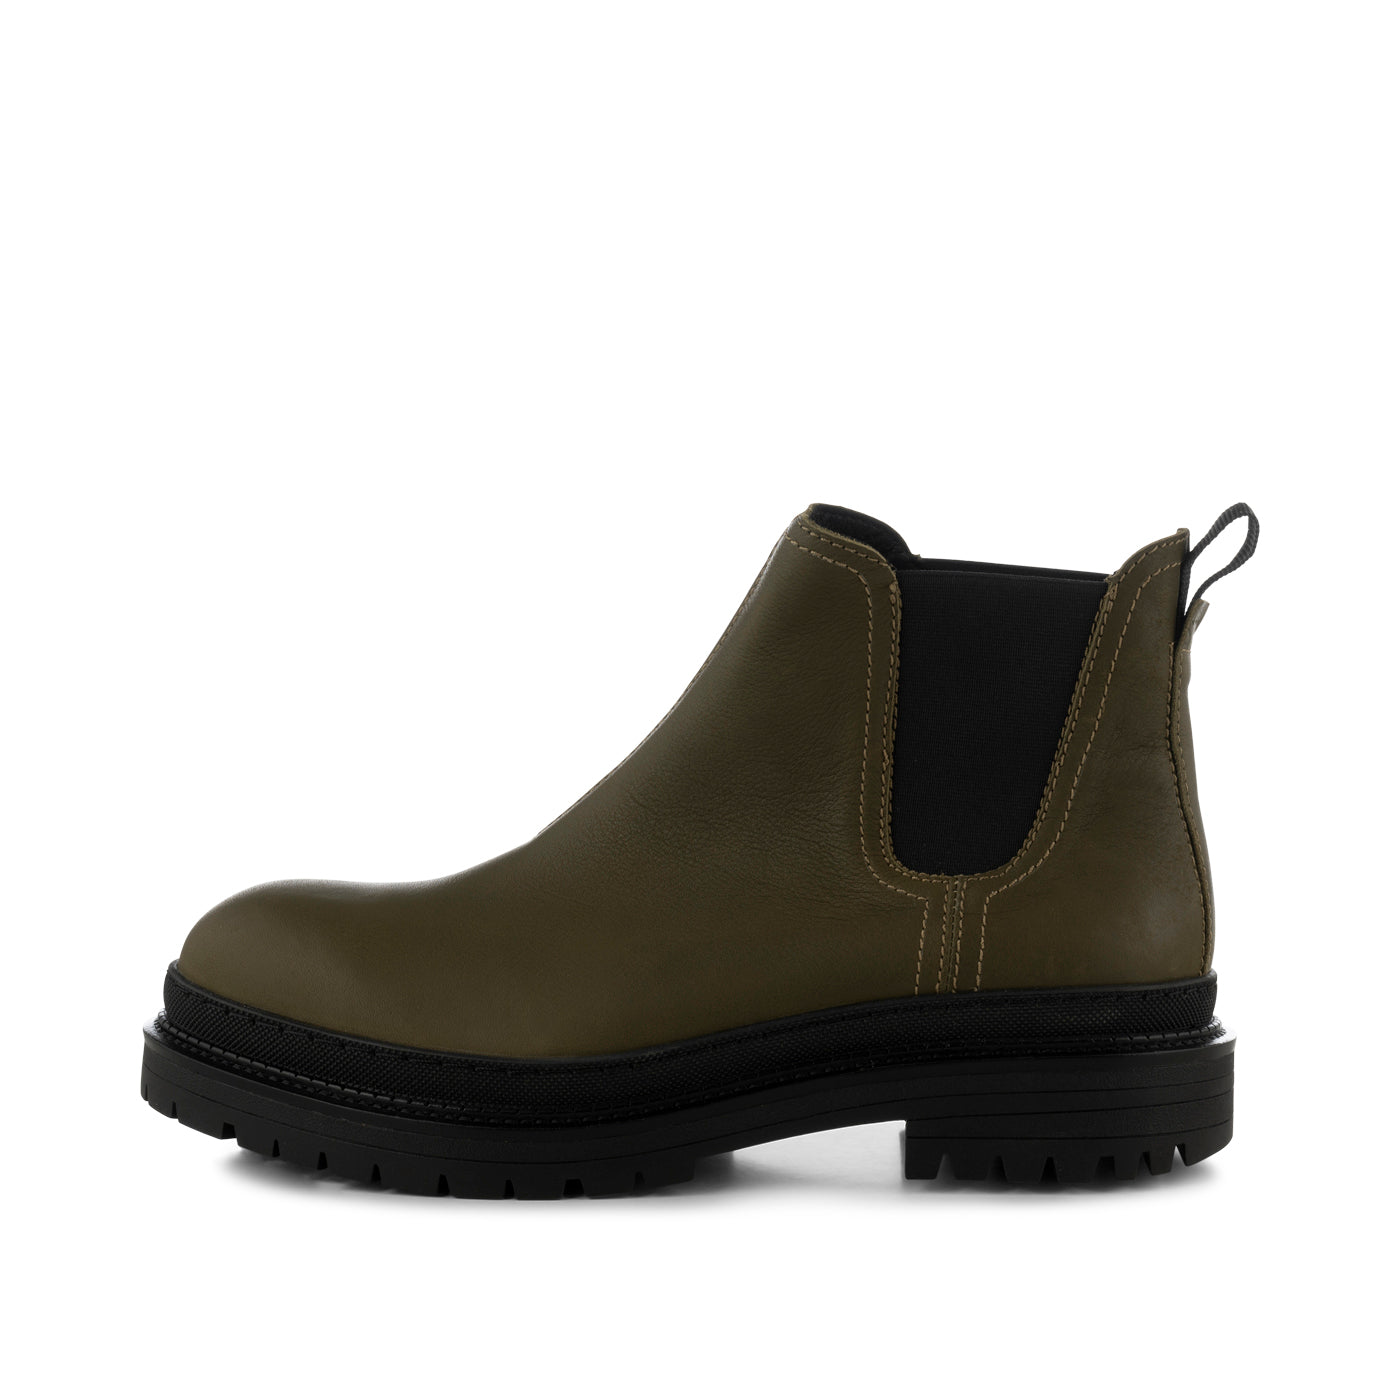 Arvid chelsea boot leather - MOSS GREEN – SHOE THE BEAR - UK